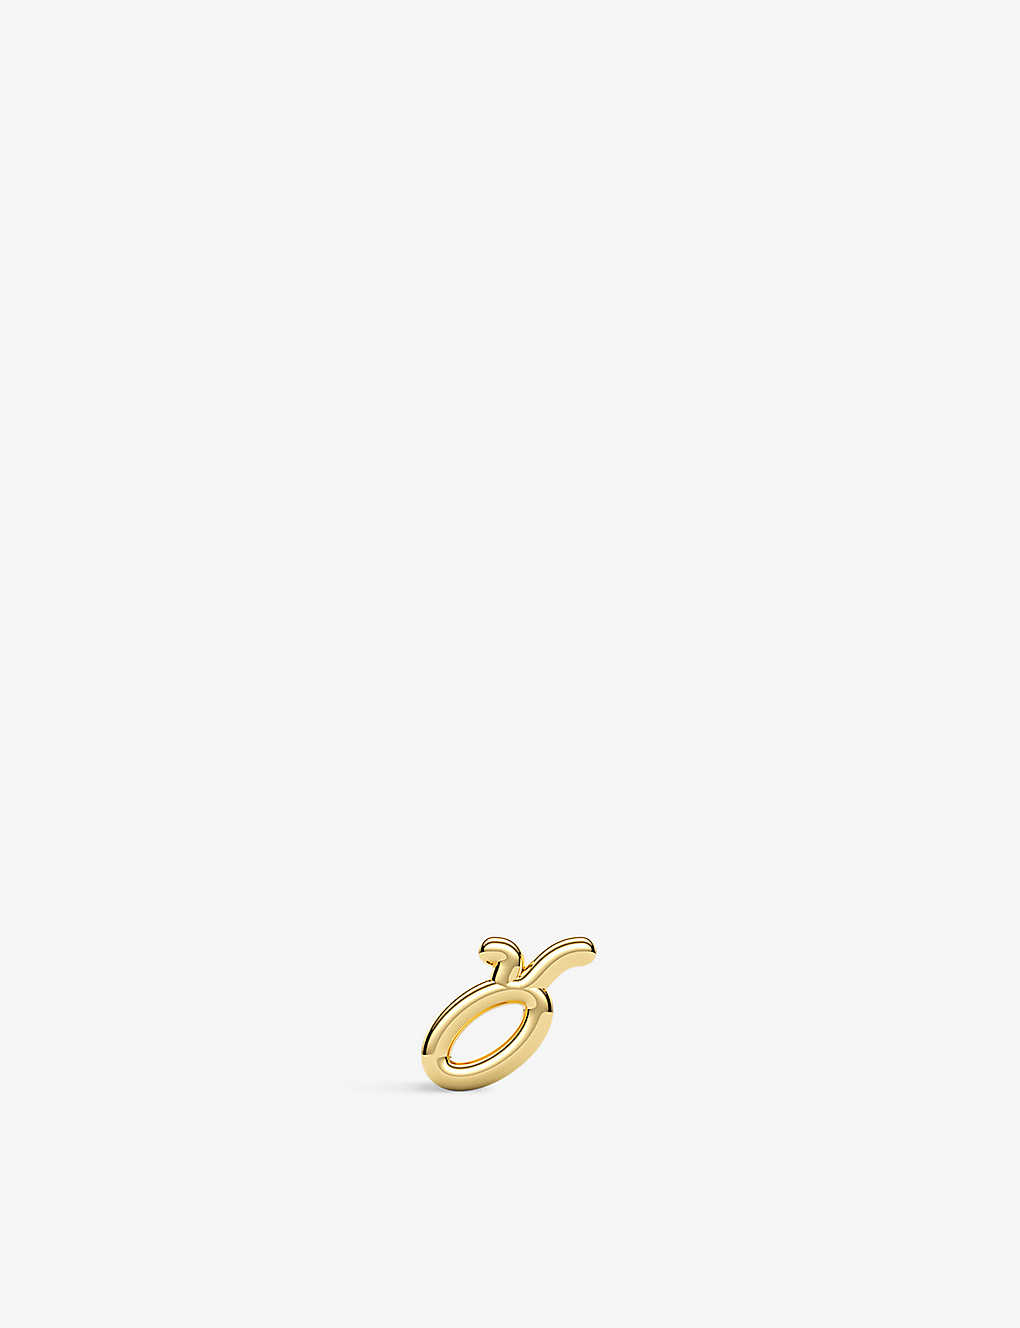 The Alkemistry Taurus Zodiac 18ct Recycled Yellow-gold Single Stud Earring